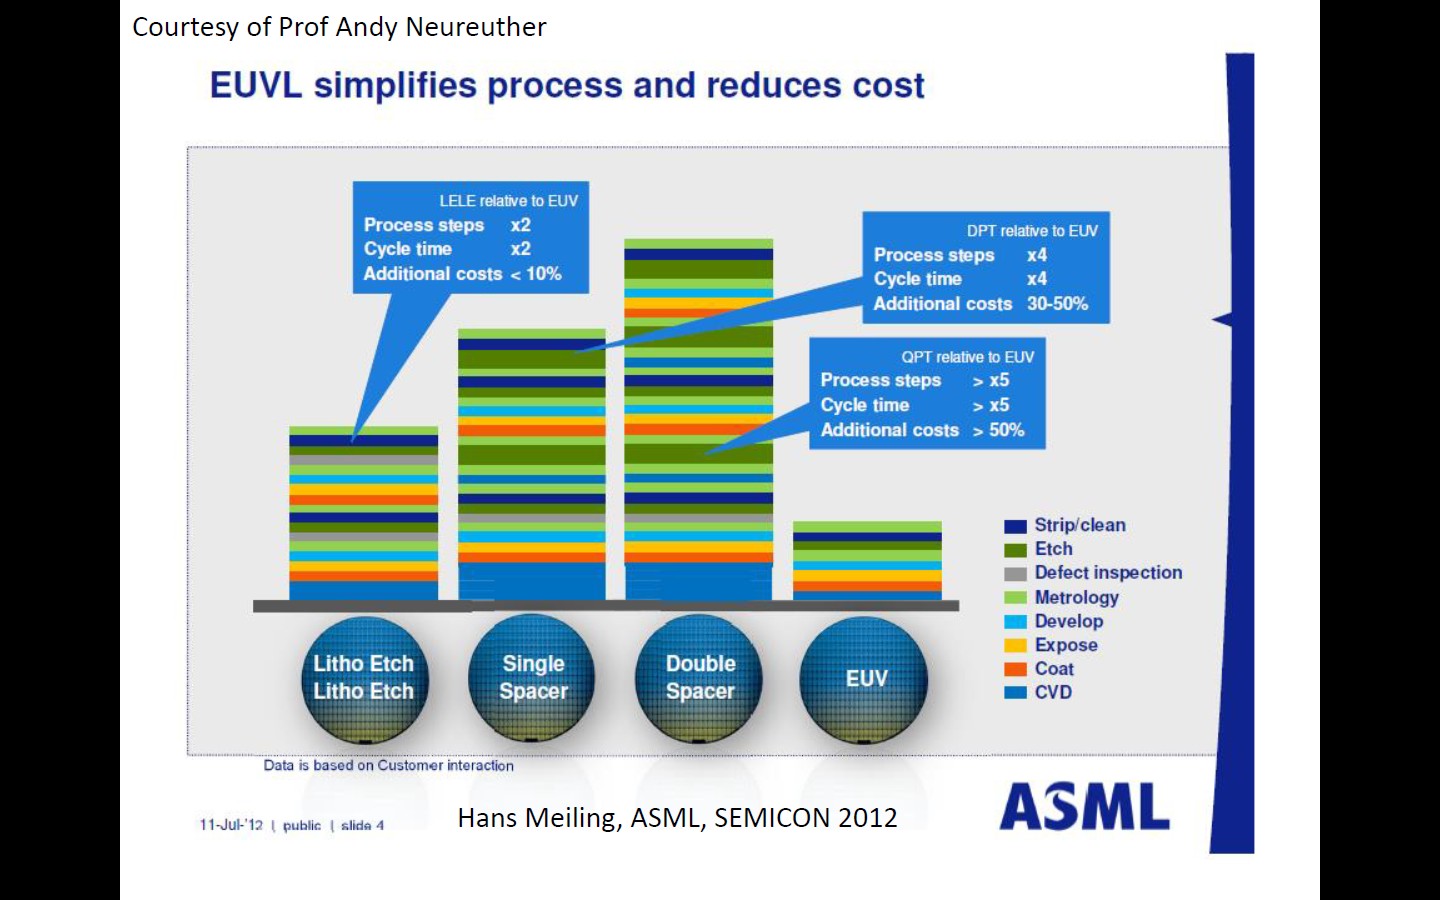 EUVL simplifies process and reduces cost